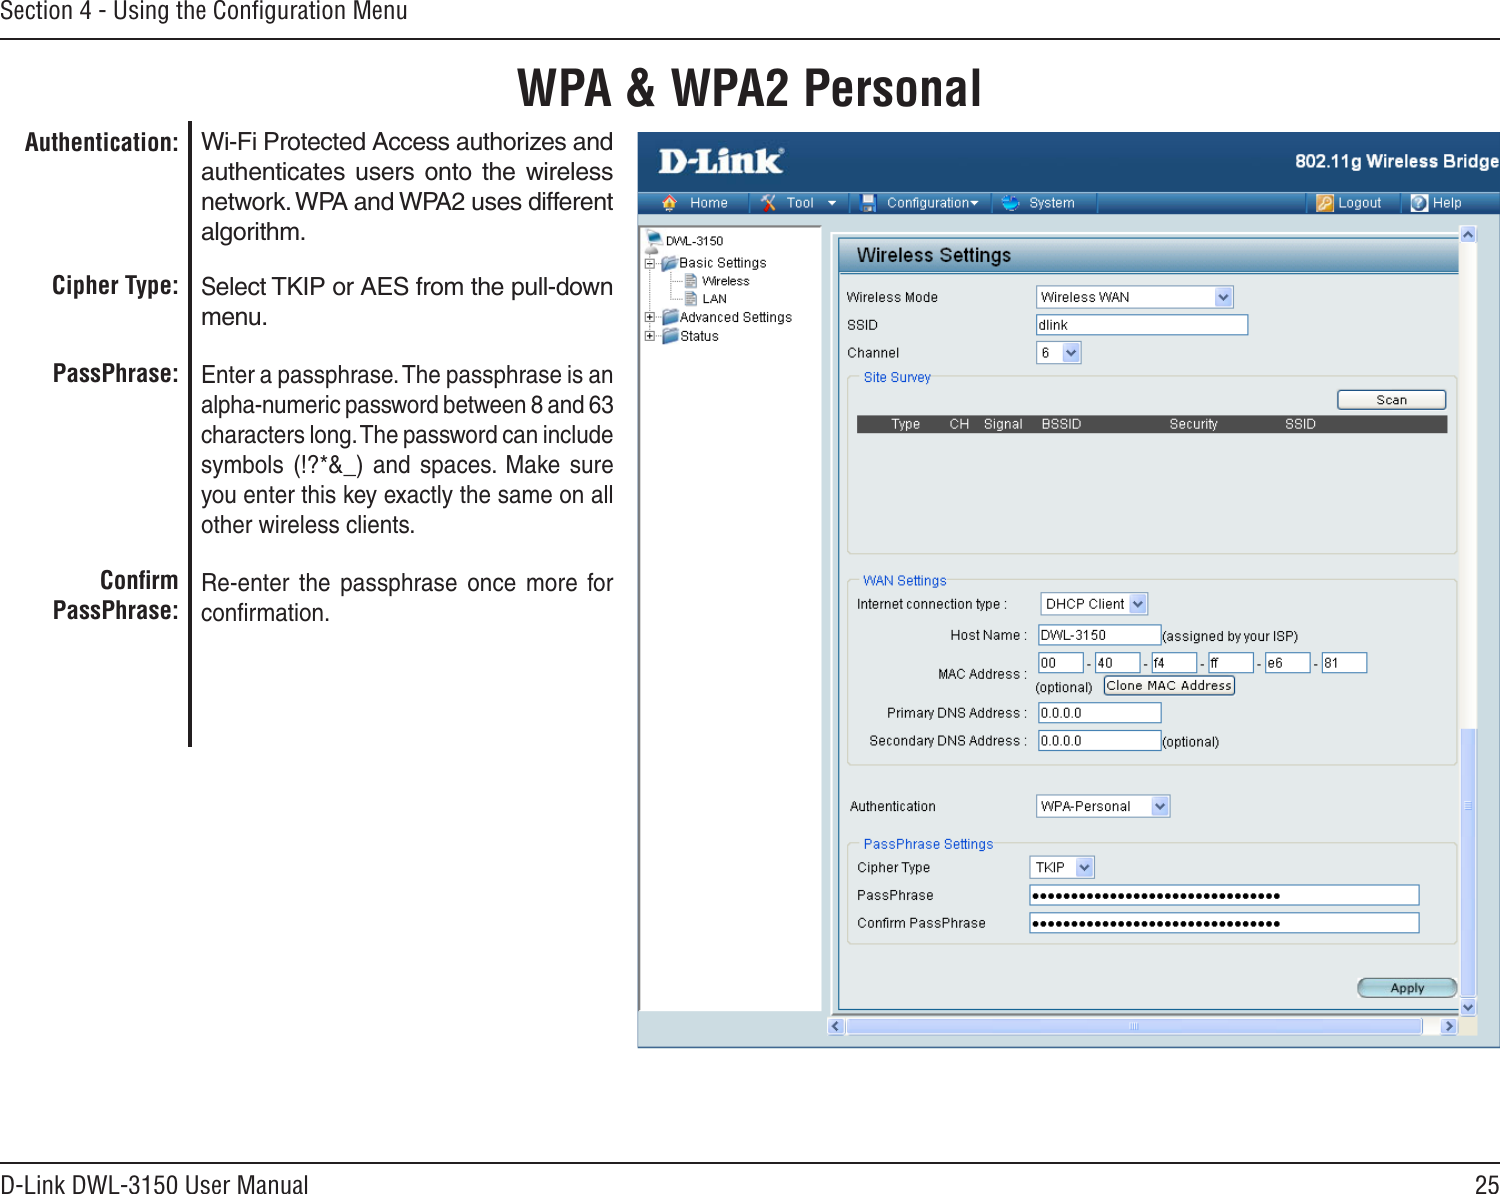 25D-Link DWL-3150 User ManualSection 4 - Using the Conﬁguration MenuWPA &amp; WPA2 PersonalWi-Fi Protected Access authorizes and authenticates  users  onto  the  wireless network. WPA and WPA2 uses different algorithm. Select TKIP or AES from the pull-down menu.Enter a passphrase. The passphrase is an alpha-numeric password between 8 and 63 characters long. The password can include symbols  (!?*&amp;_)  and  spaces.  Make  sure you enter this key exactly the same on all other wireless clients.Re-enter  the  passphrase  once  more  for conﬁrmation.Authentication:Cipher Type:PassPhrase:Conﬁrm PassPhrase: